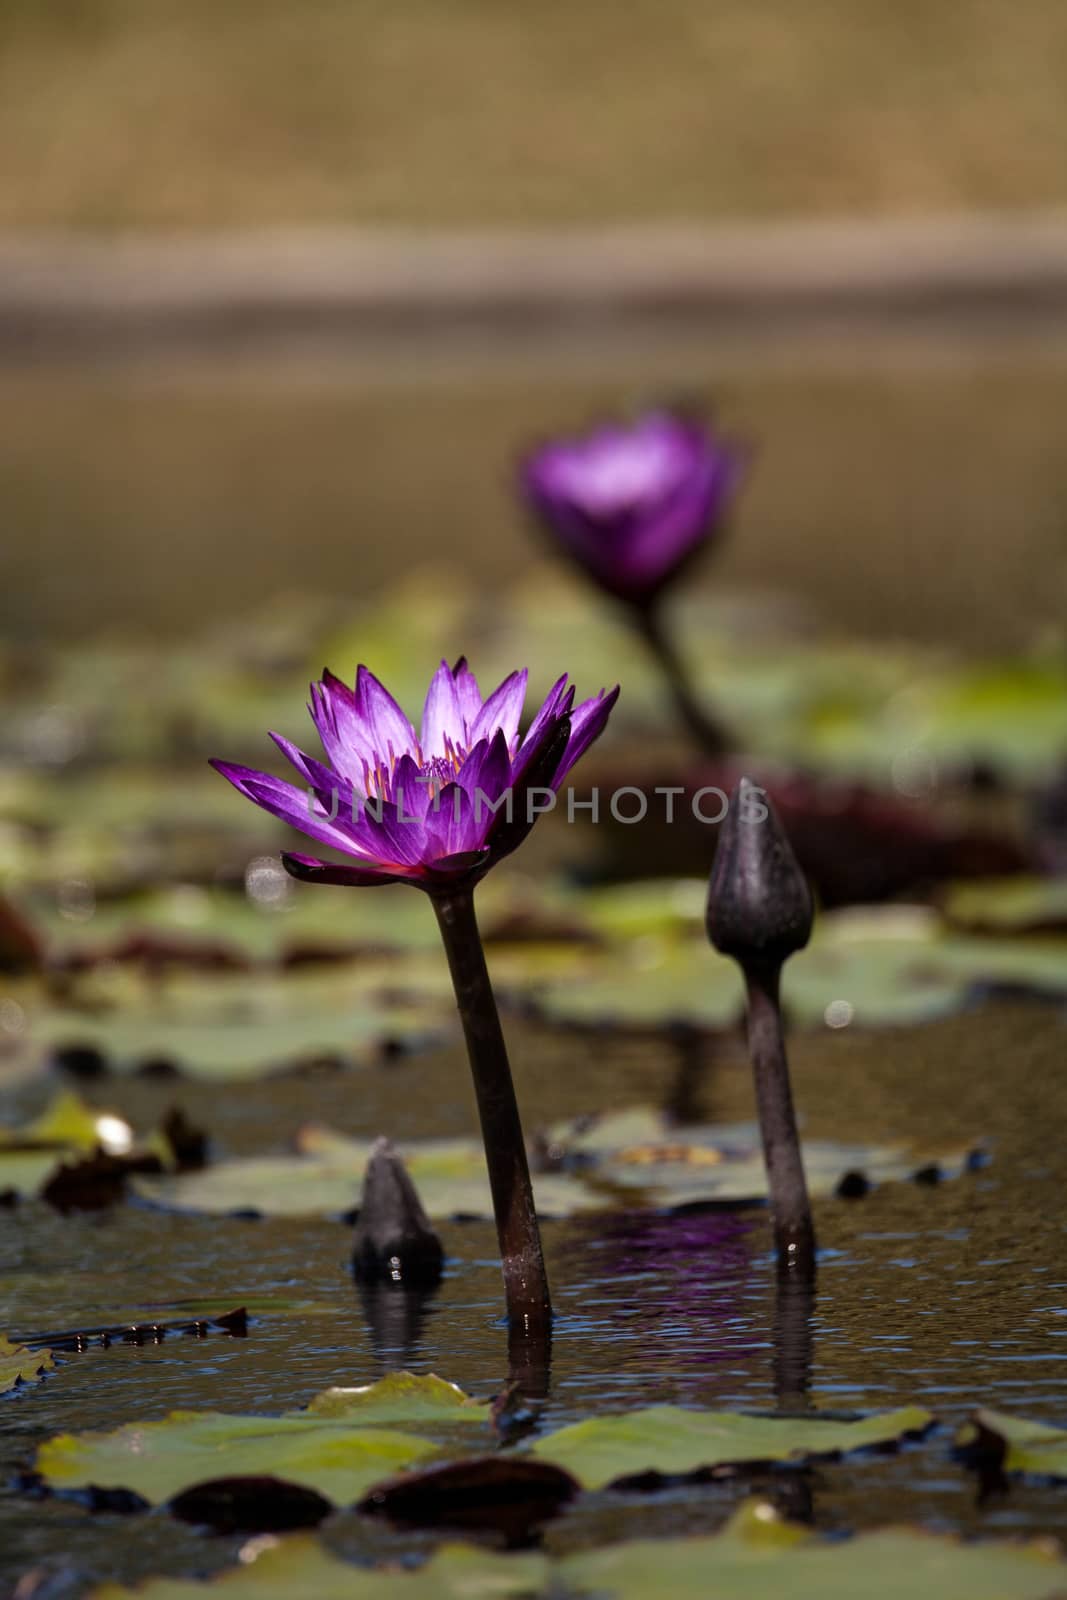 Blue Star Water lily Nymphaea nouchali blossoms among lily pads on a pond in Naples, Florida